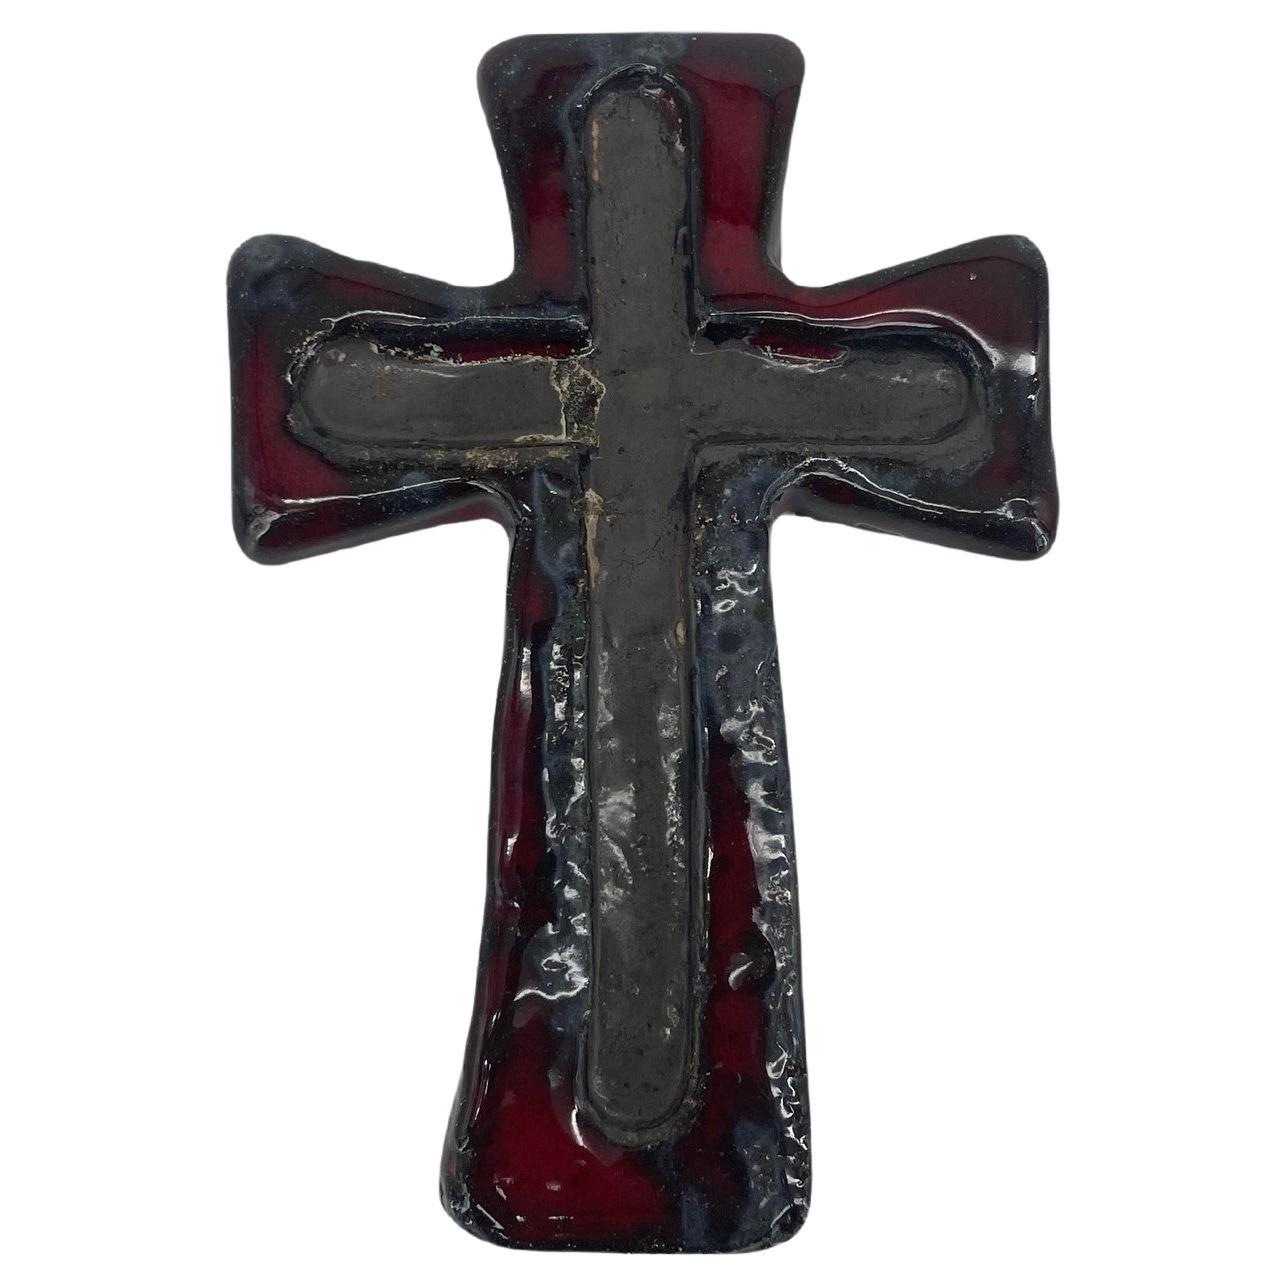 Crucifix in Red, Black and Grey, Wall Hanging. 1970s Ceramic Cross Fat Lava